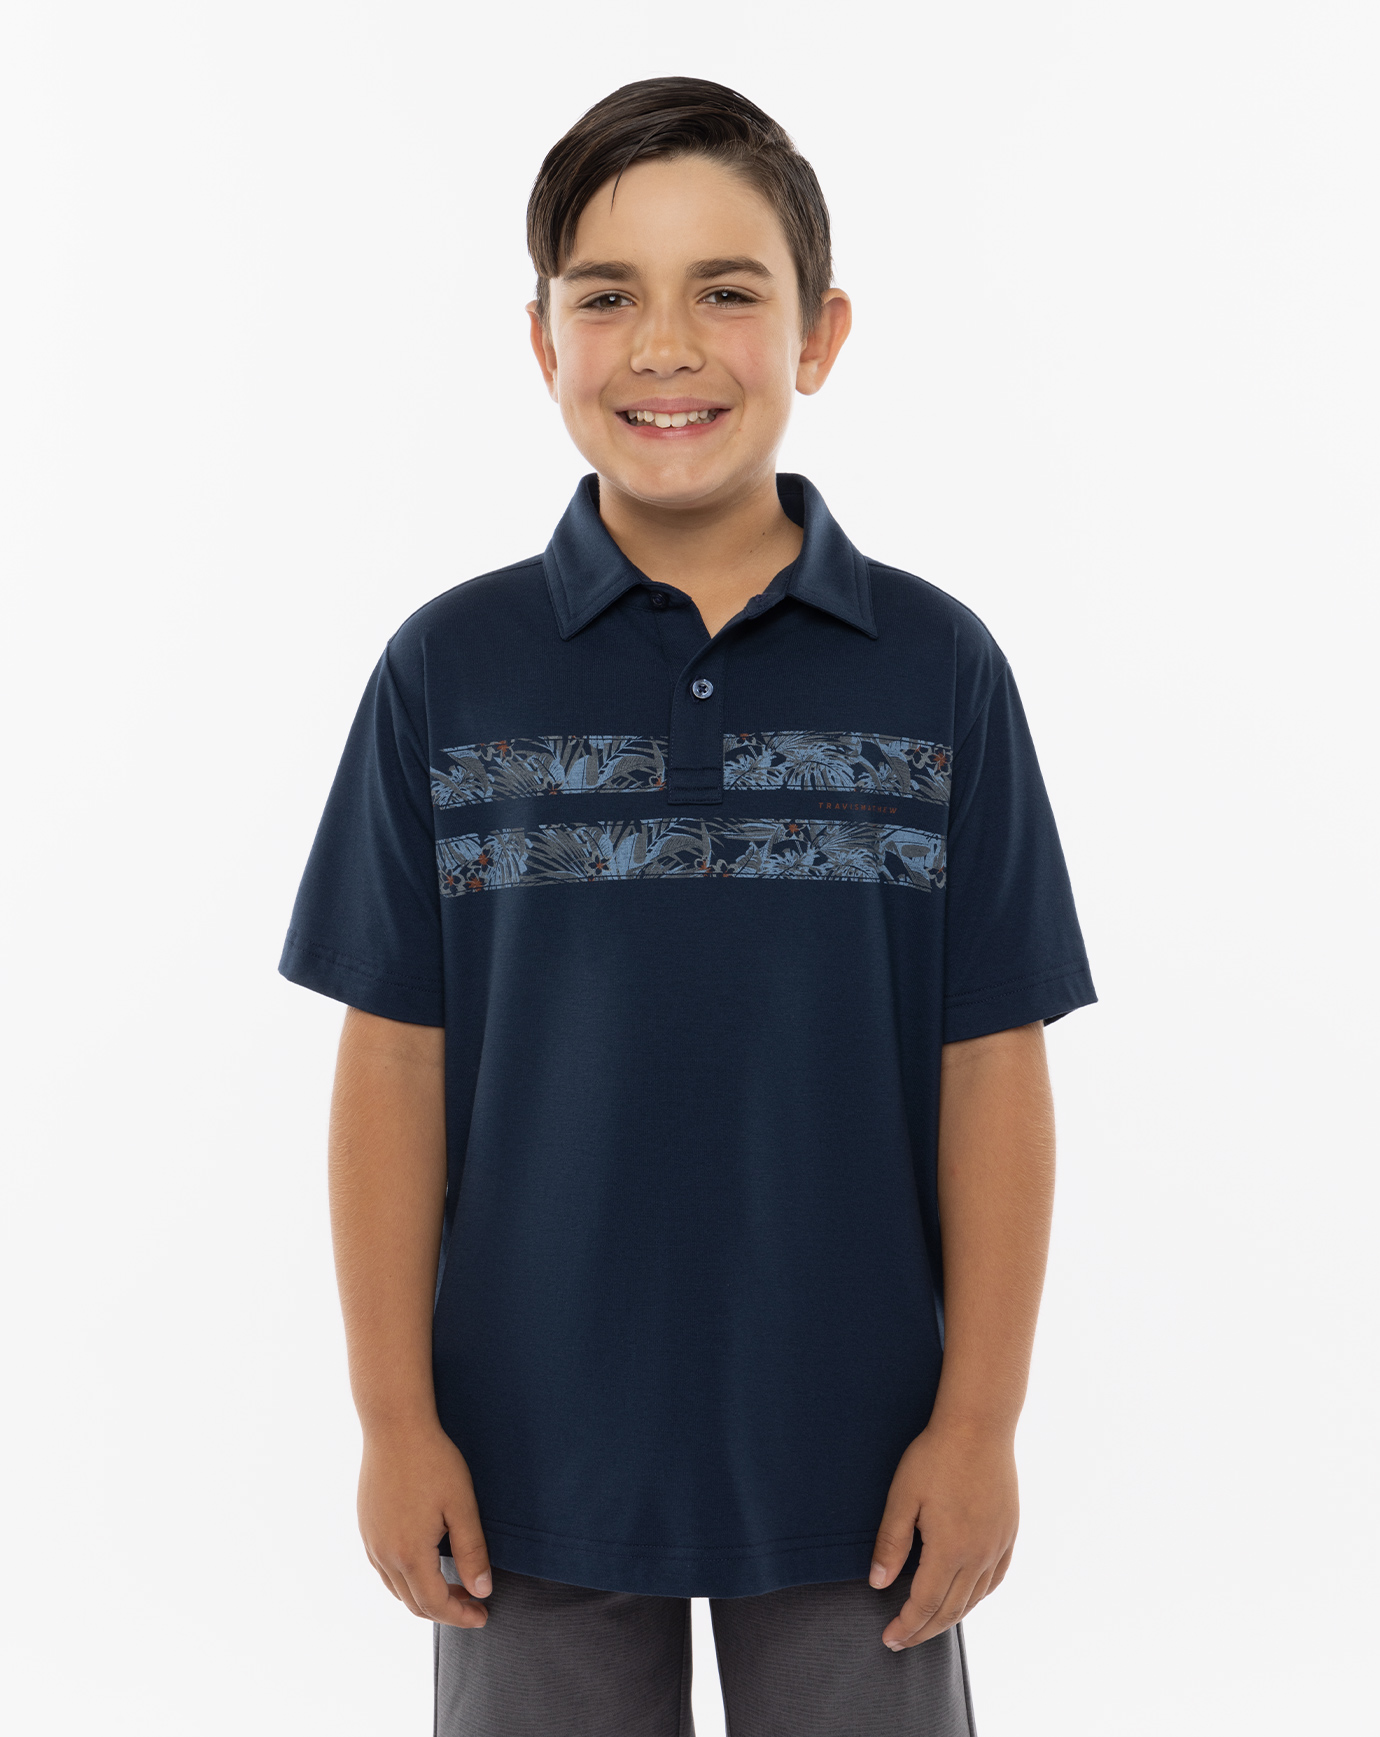 PIER RUNNER YOUTH POLO 1